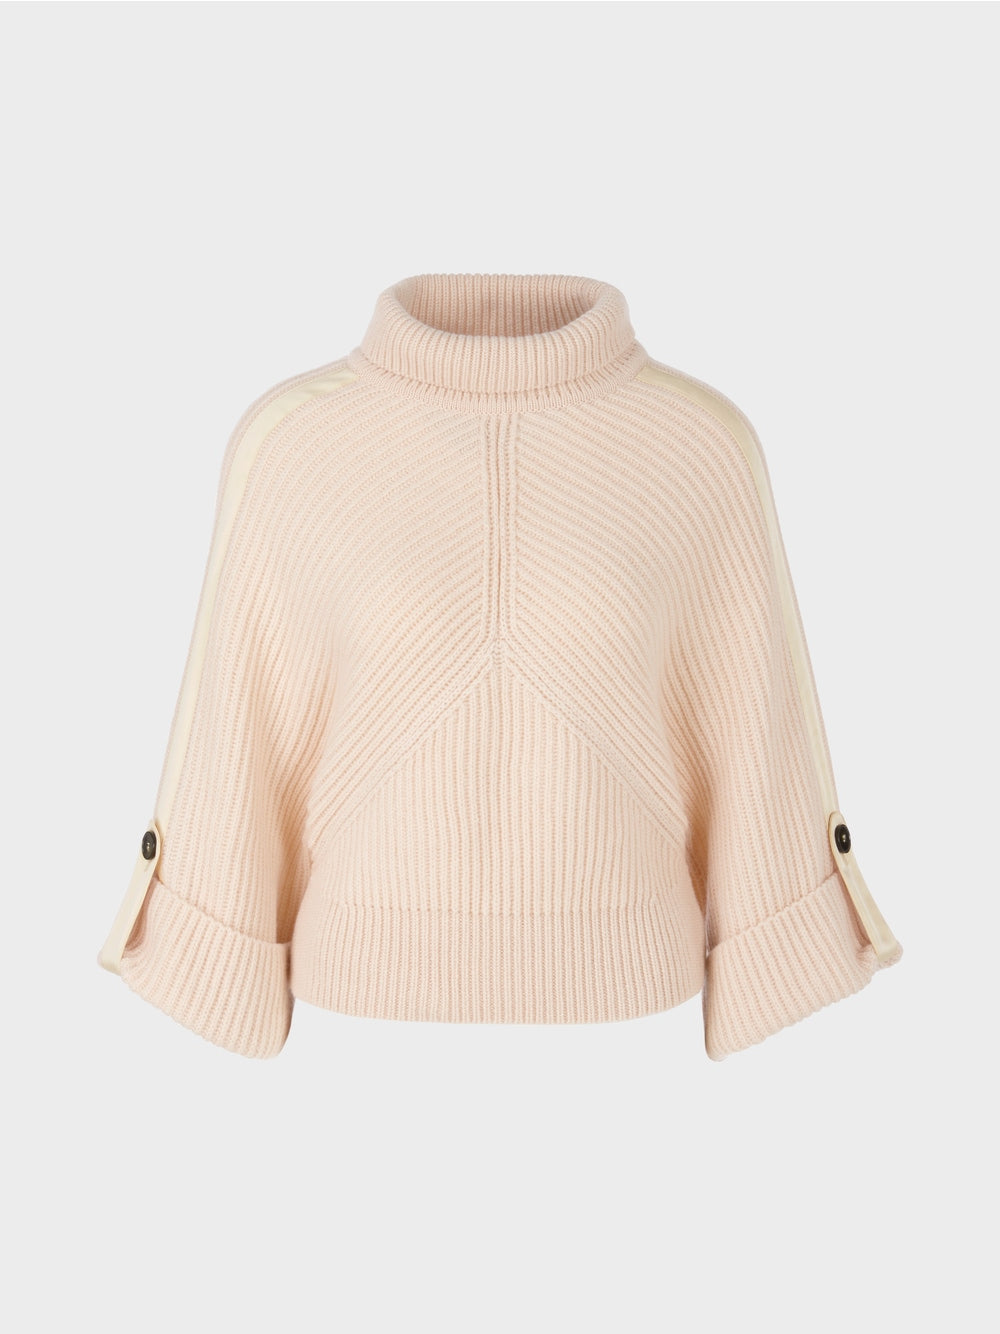 Marc Cain Cream Valuable Sweater Knitted in Germany